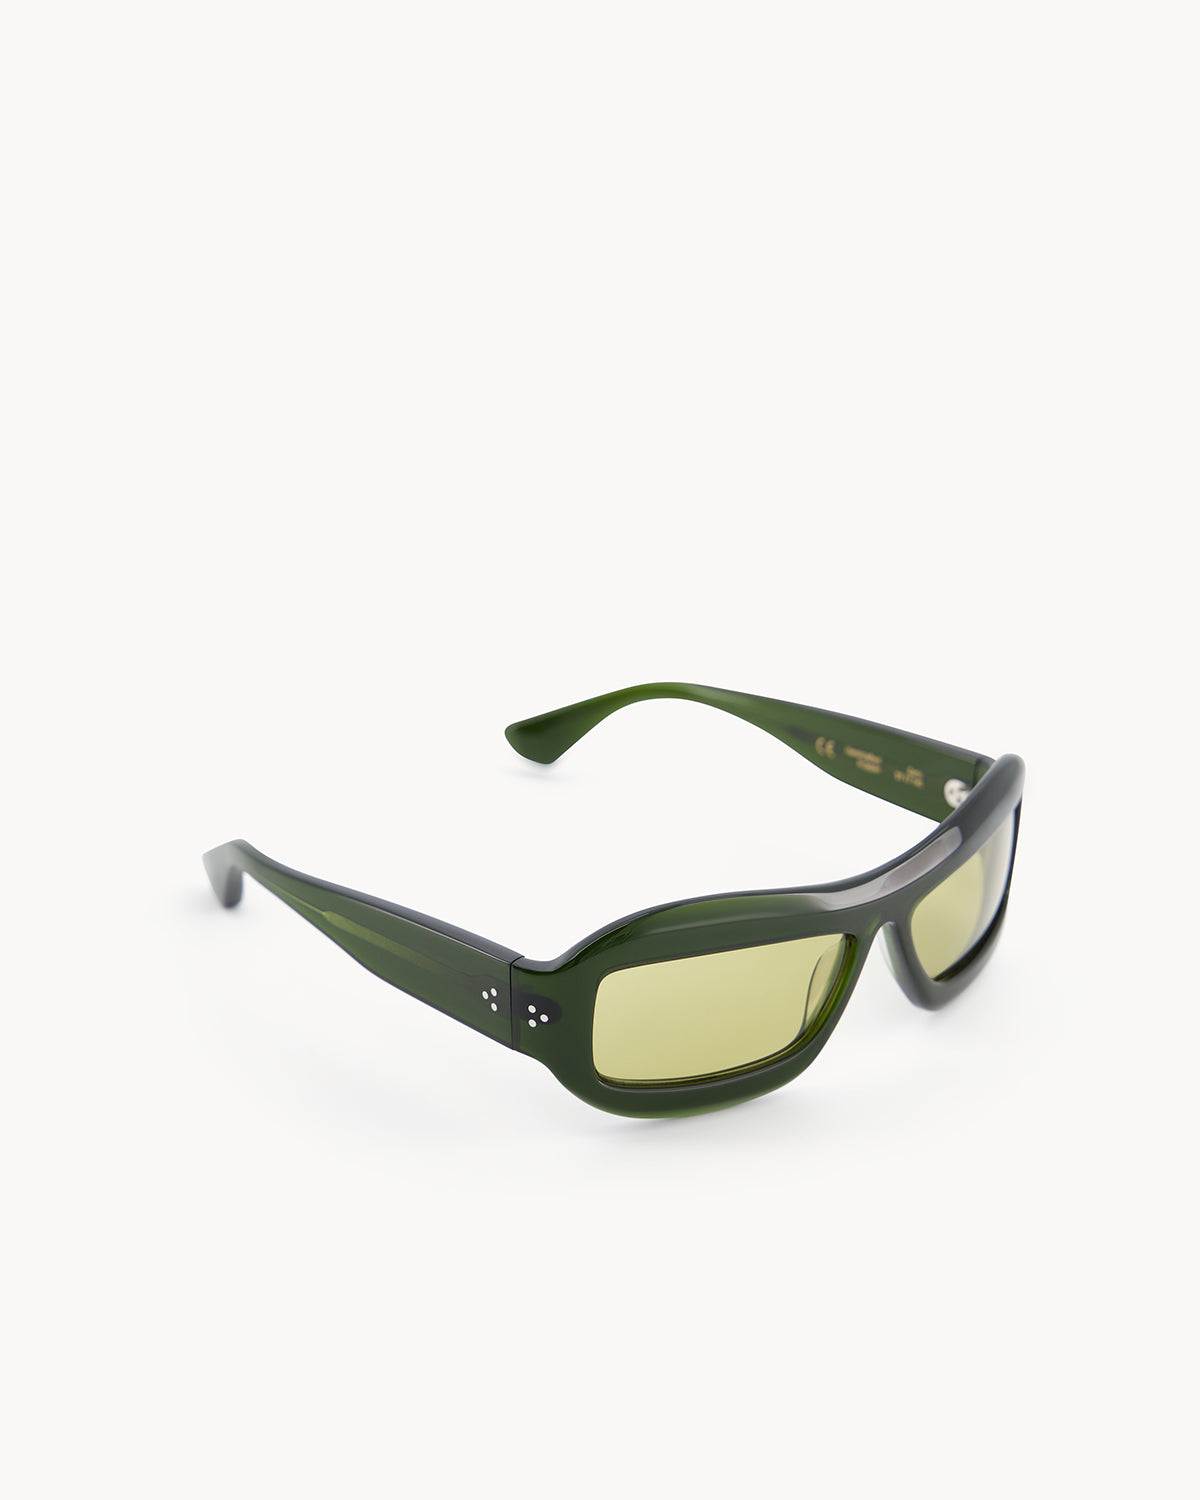 Port Tanger Zarin Sunglasses in Cardamom Acetate and Warm Olive Lenses 2